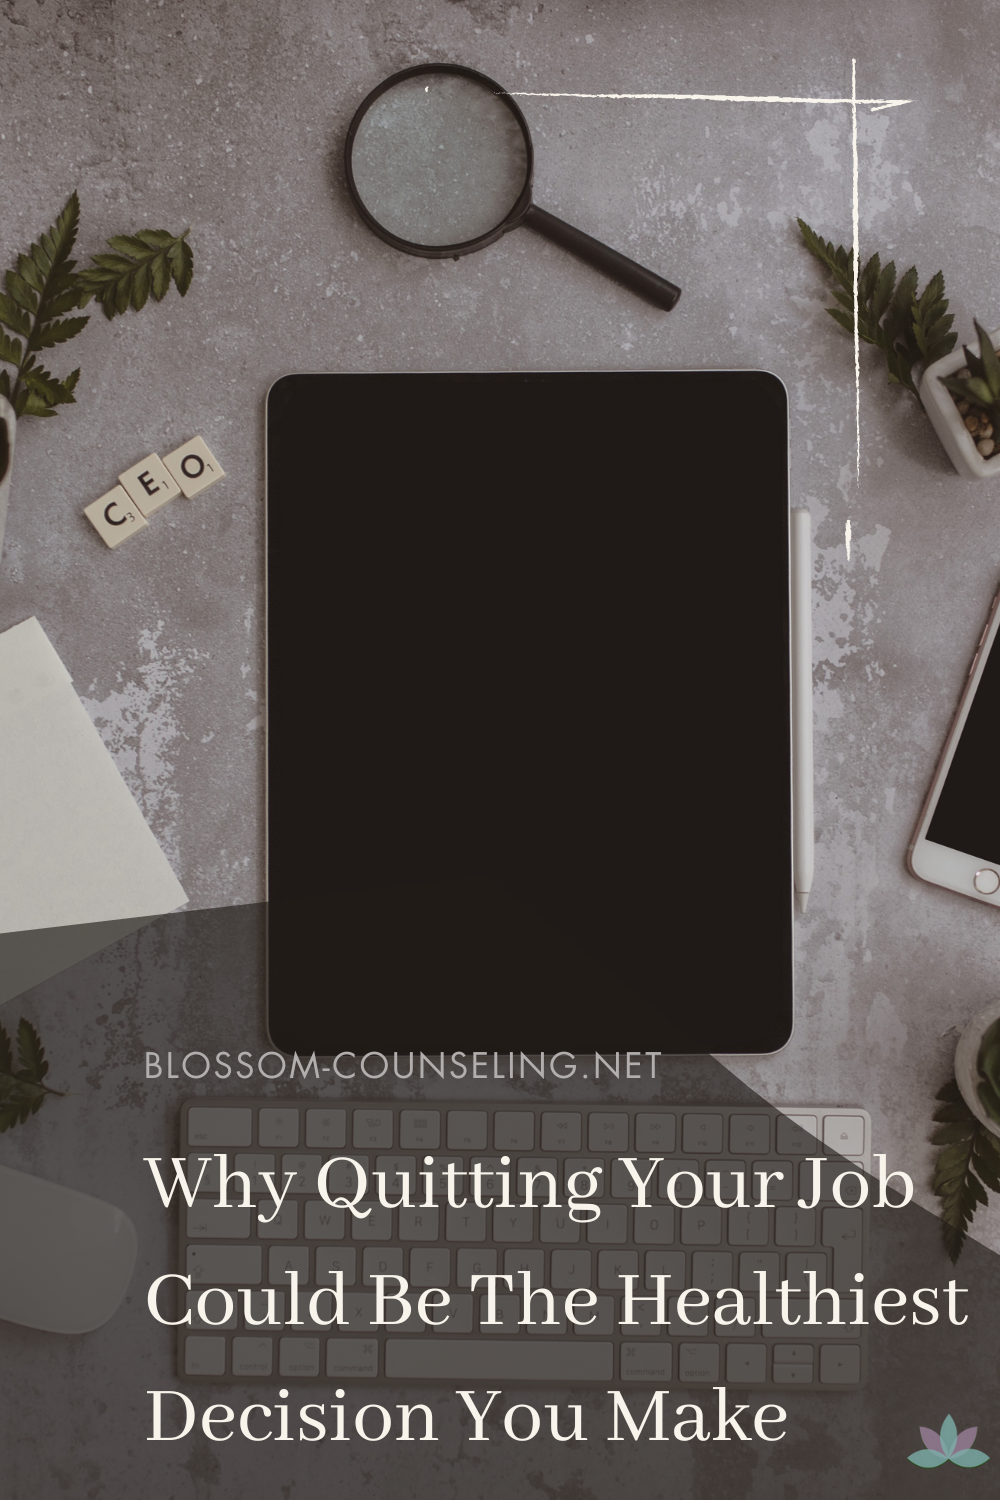 Why Quitting Your Job Could Be The Healthiest Decision You Make